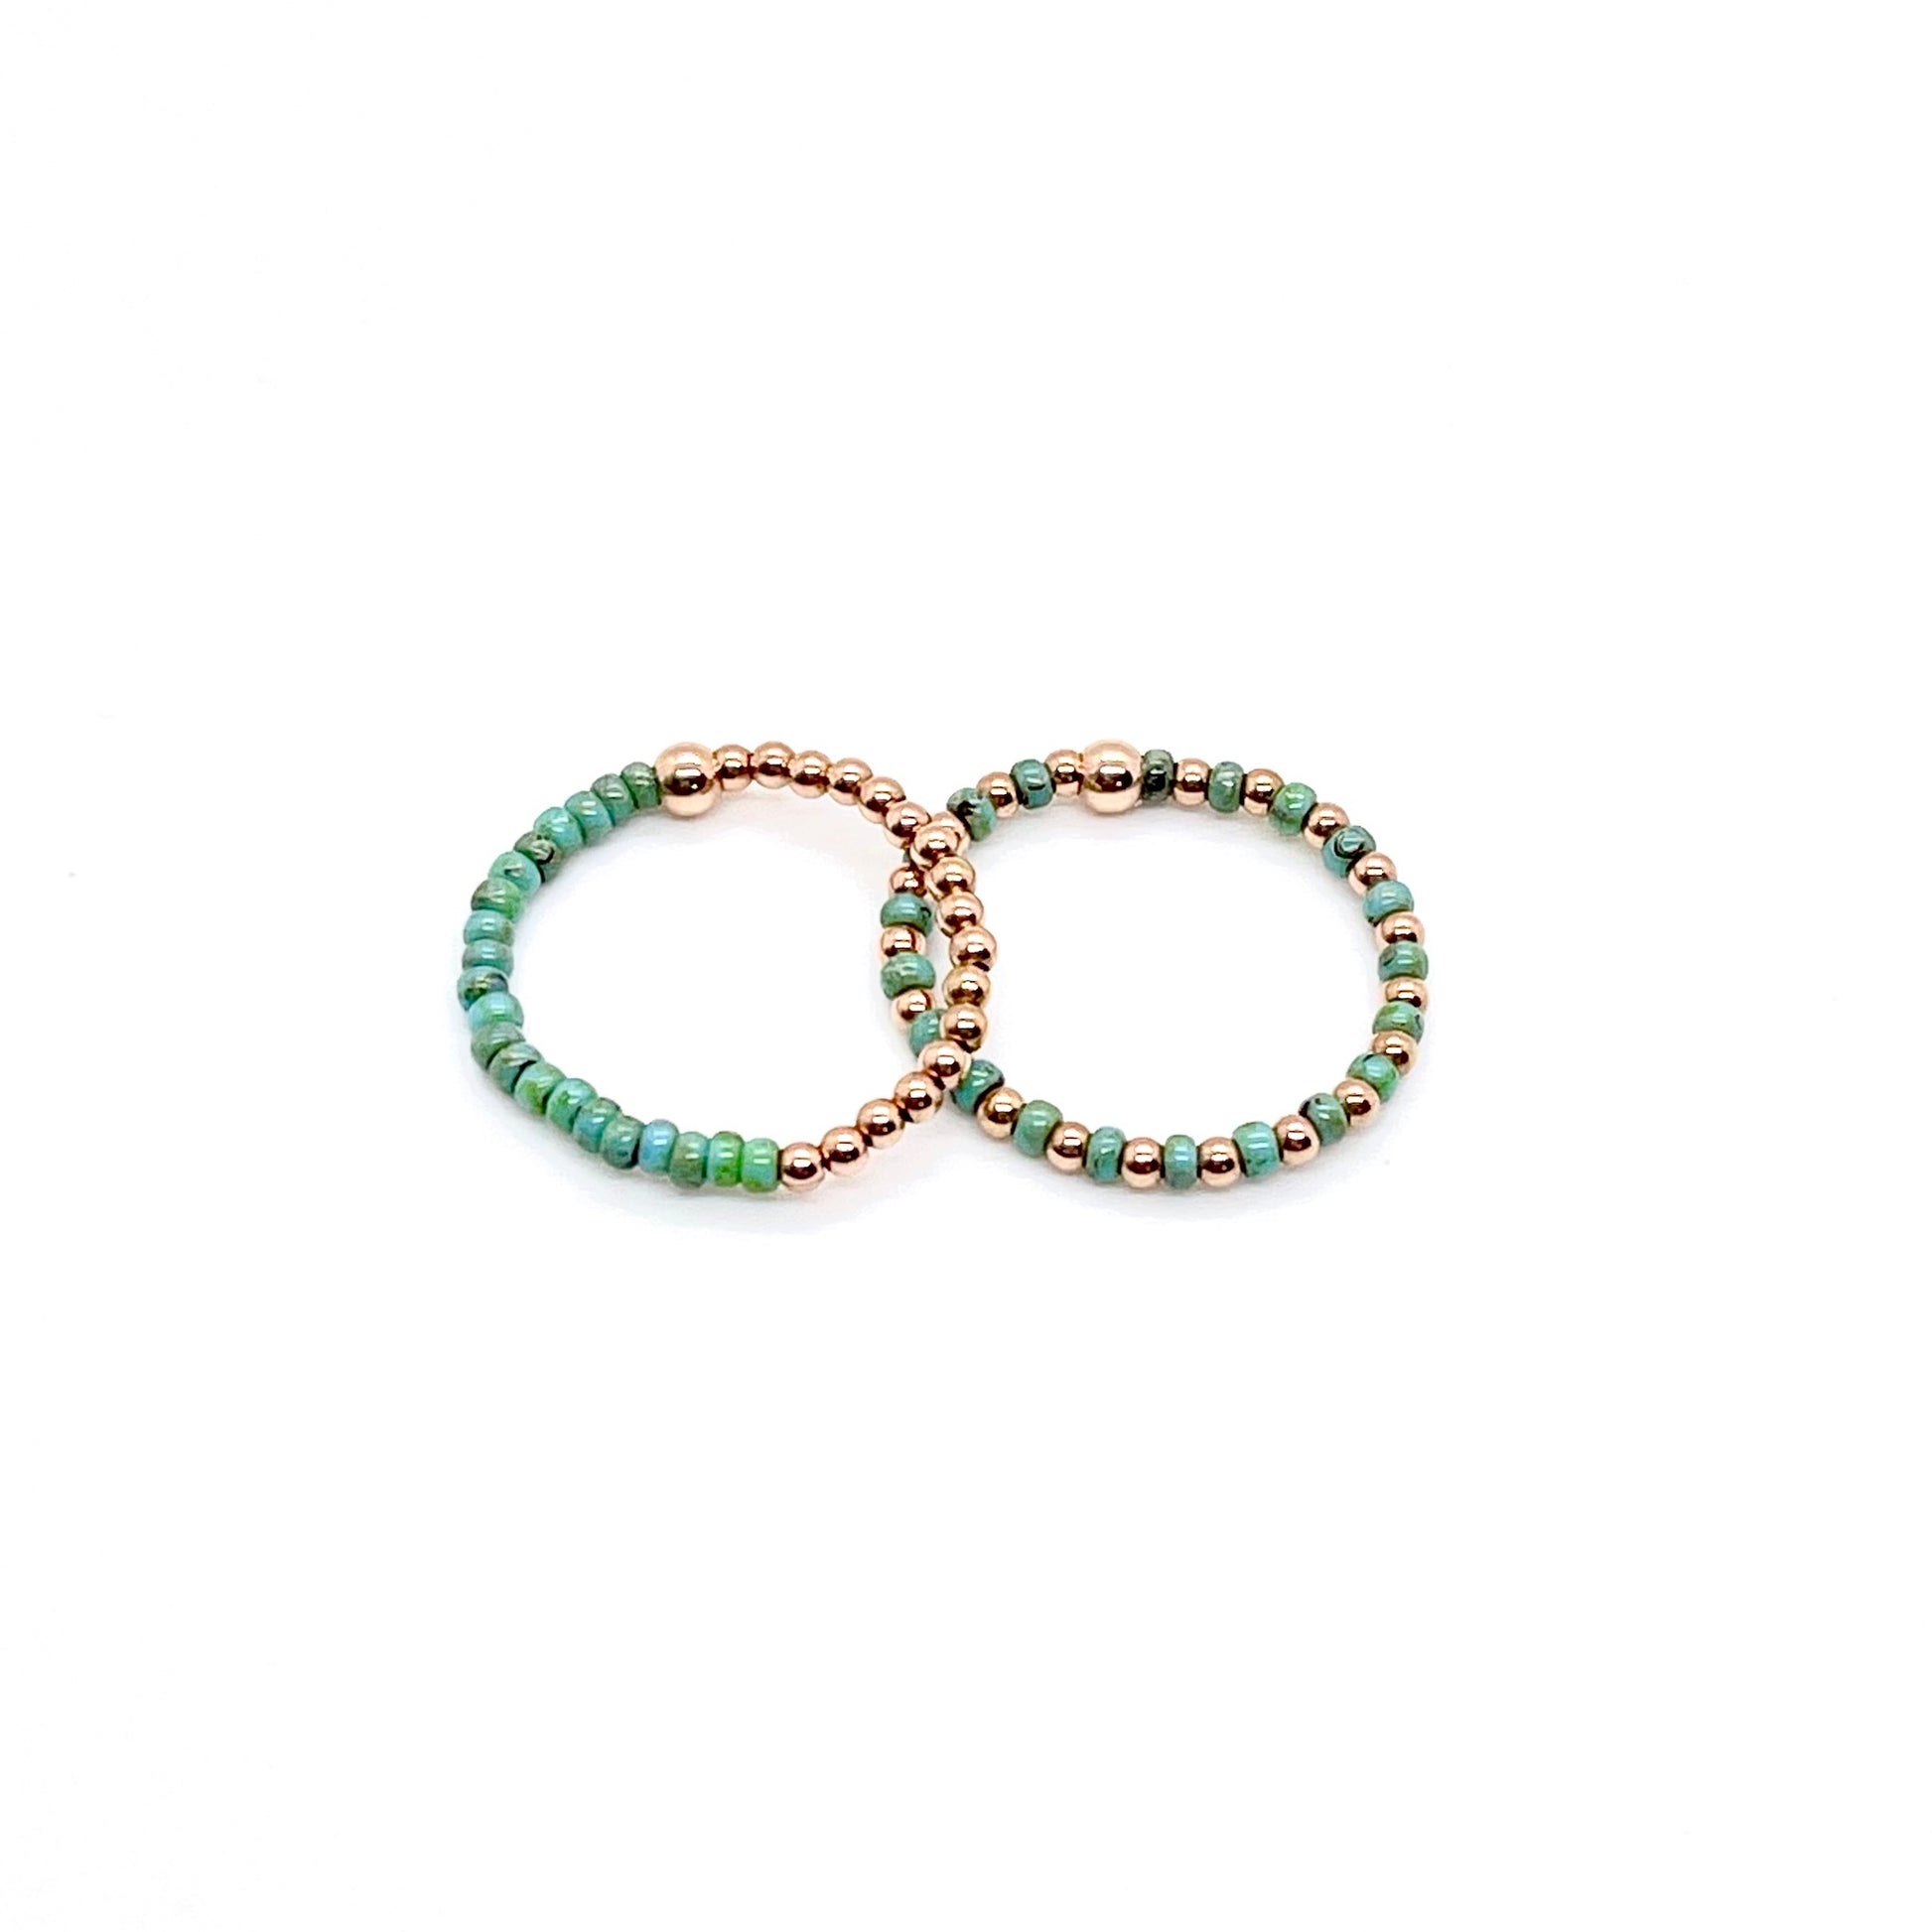 Stretch ring set with turquoise color block and seed beads alternating with 2mm 14K rose gold filled balls on stretch cord.